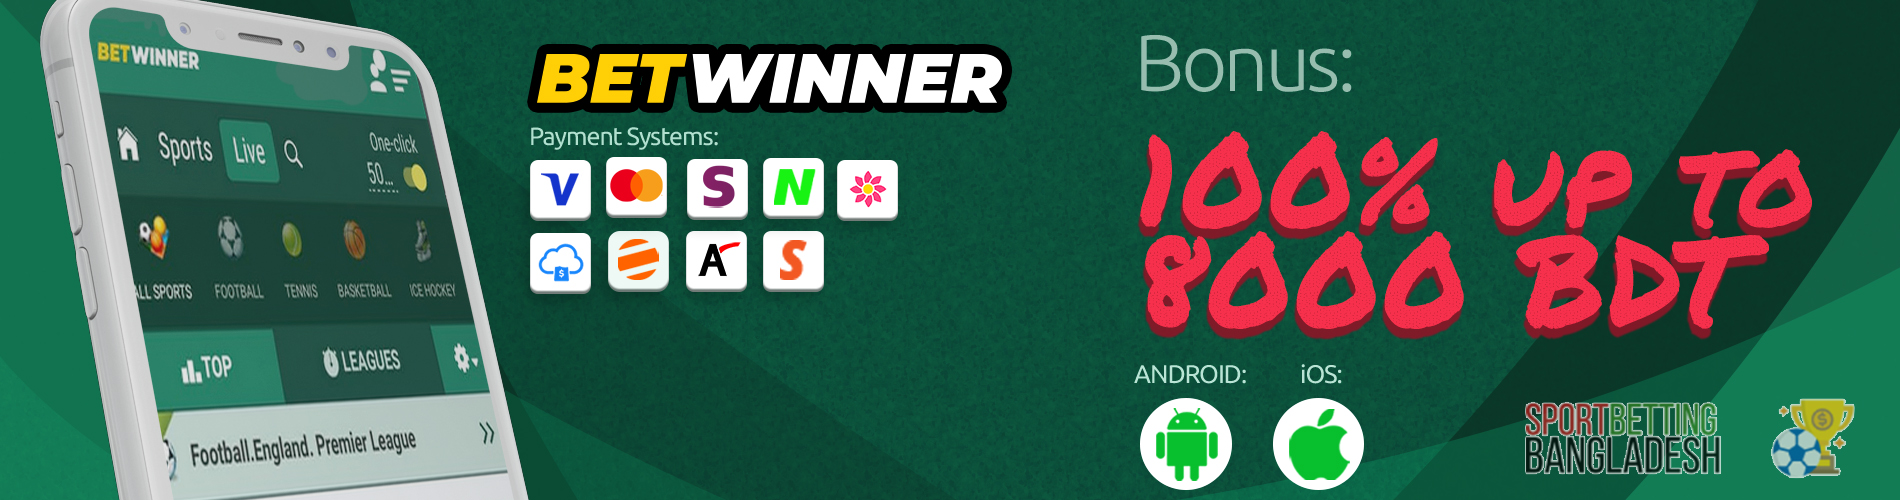 Betwinner Bangladesh app: payment systems, available platforms, welcome bonus.